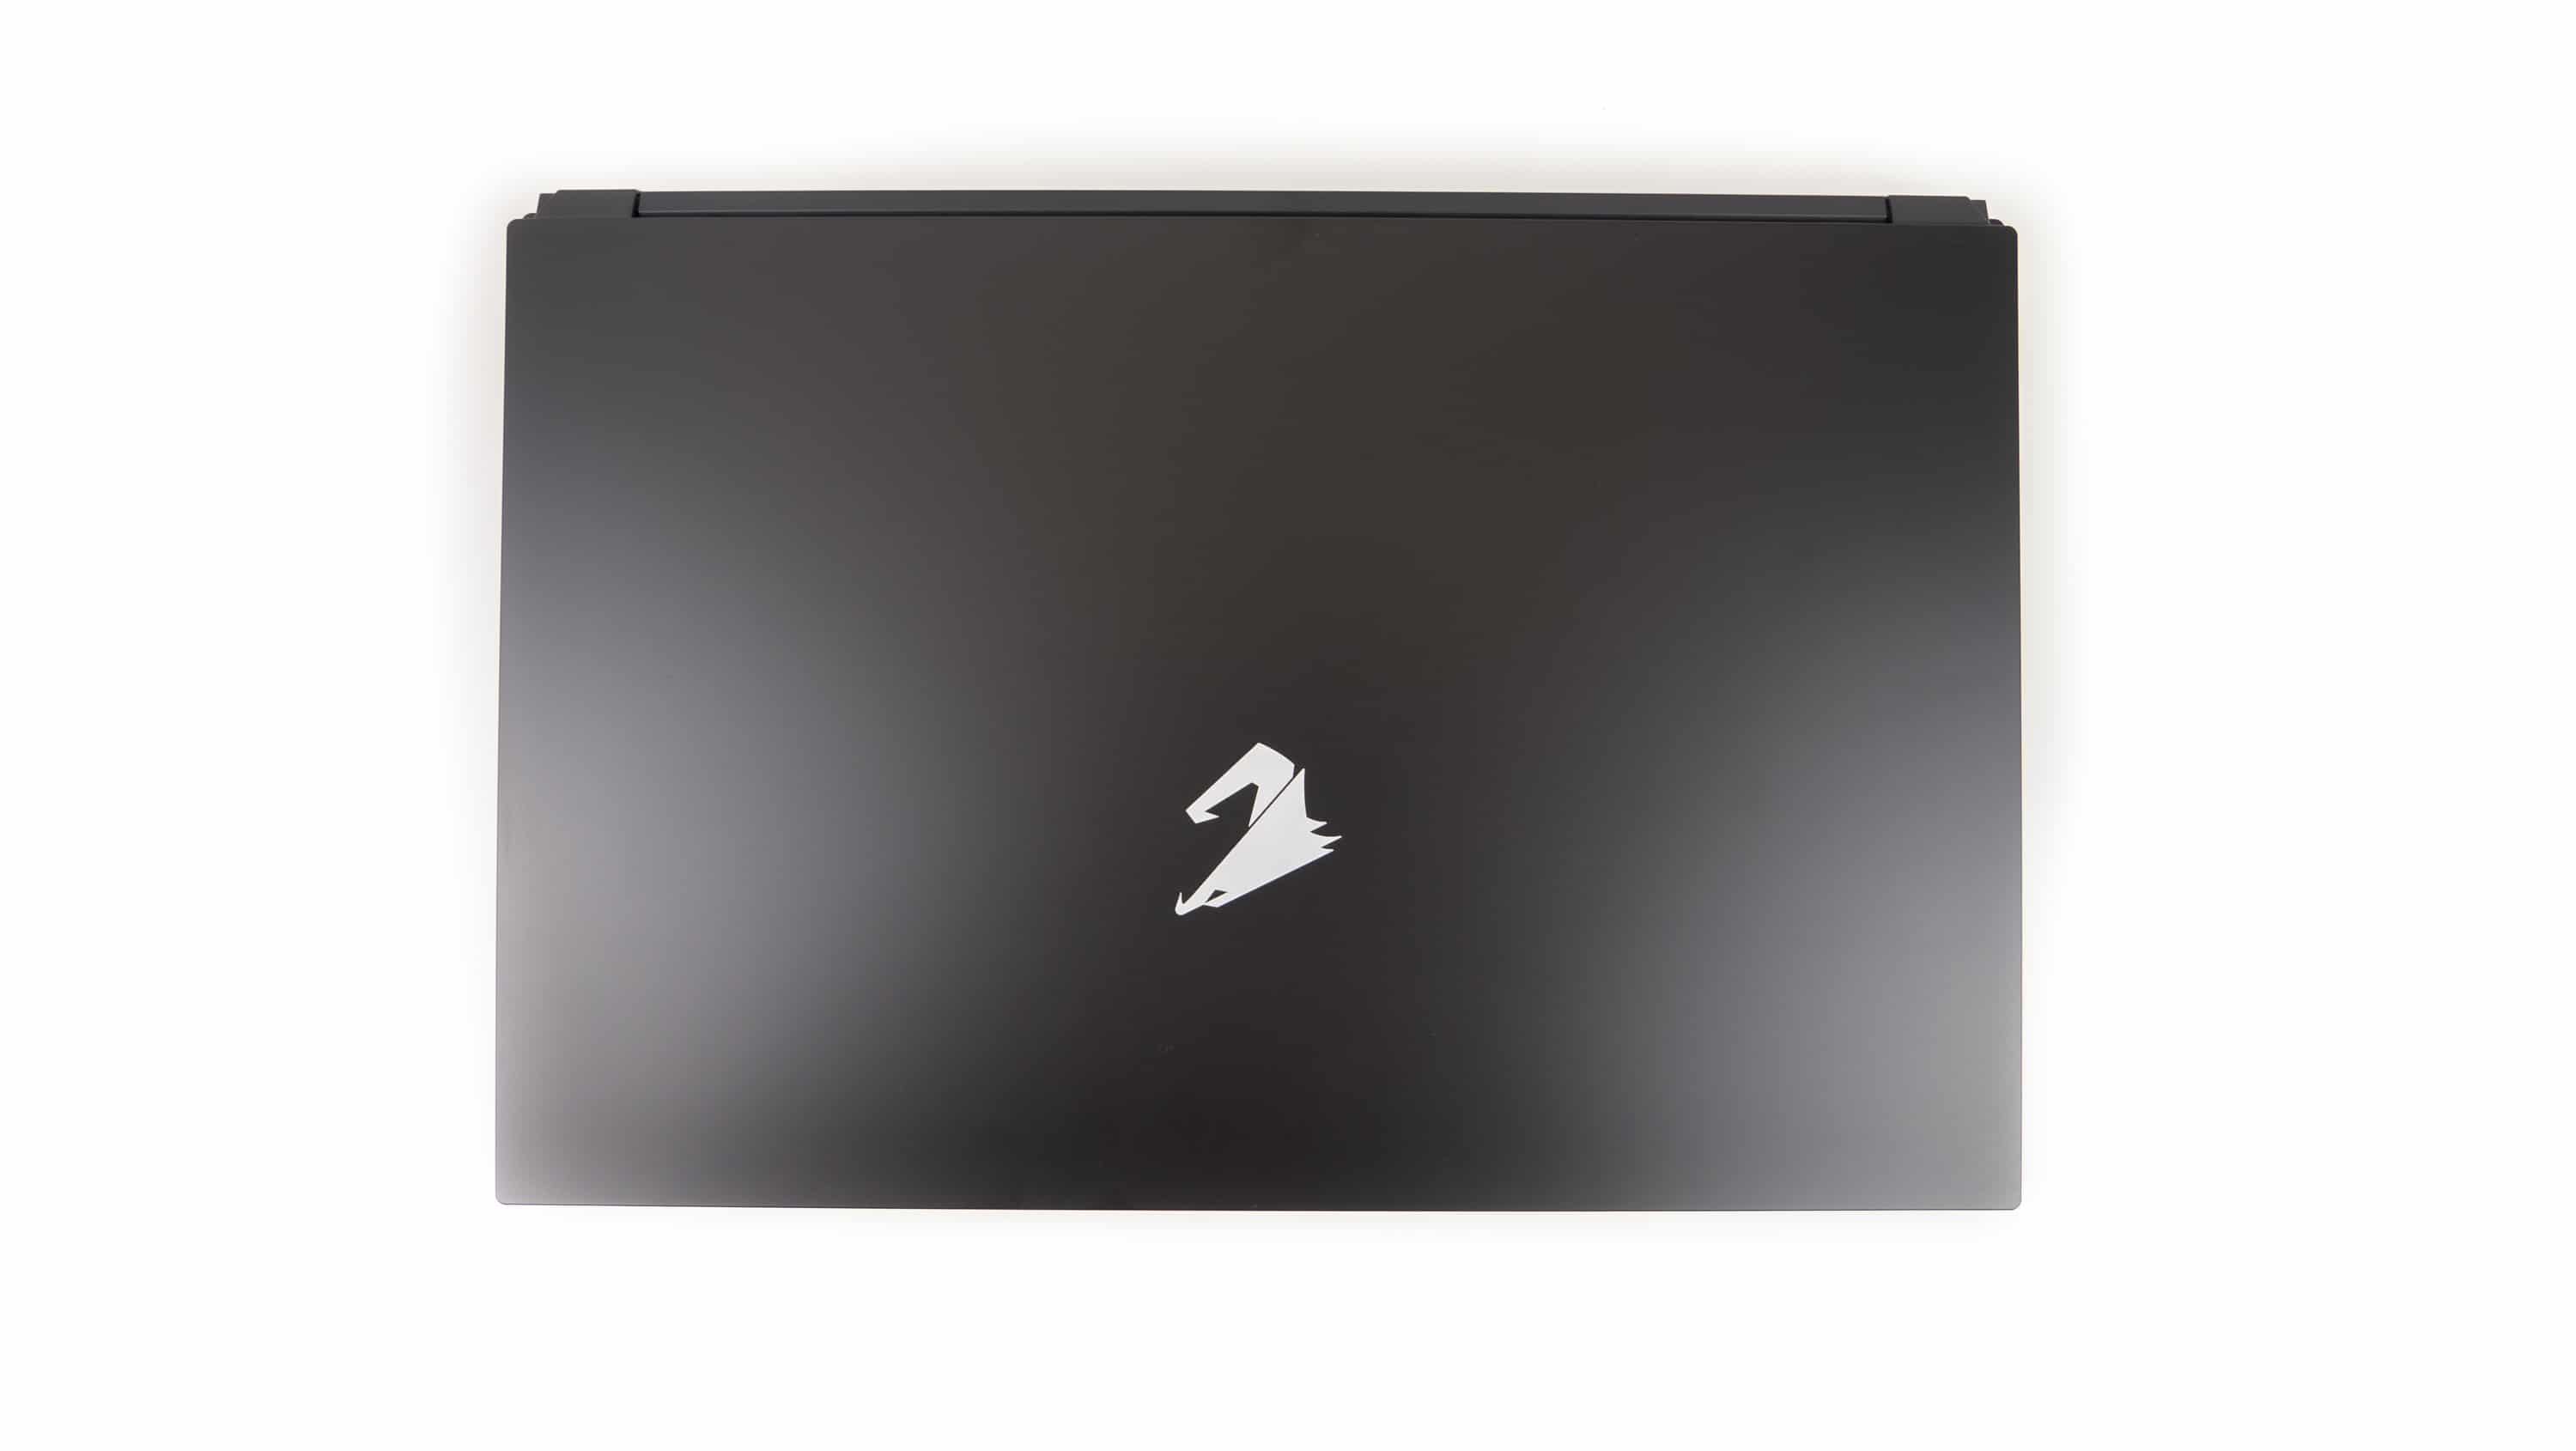 Test of the Aorus 7 KB: Gaming notebook on the test bench